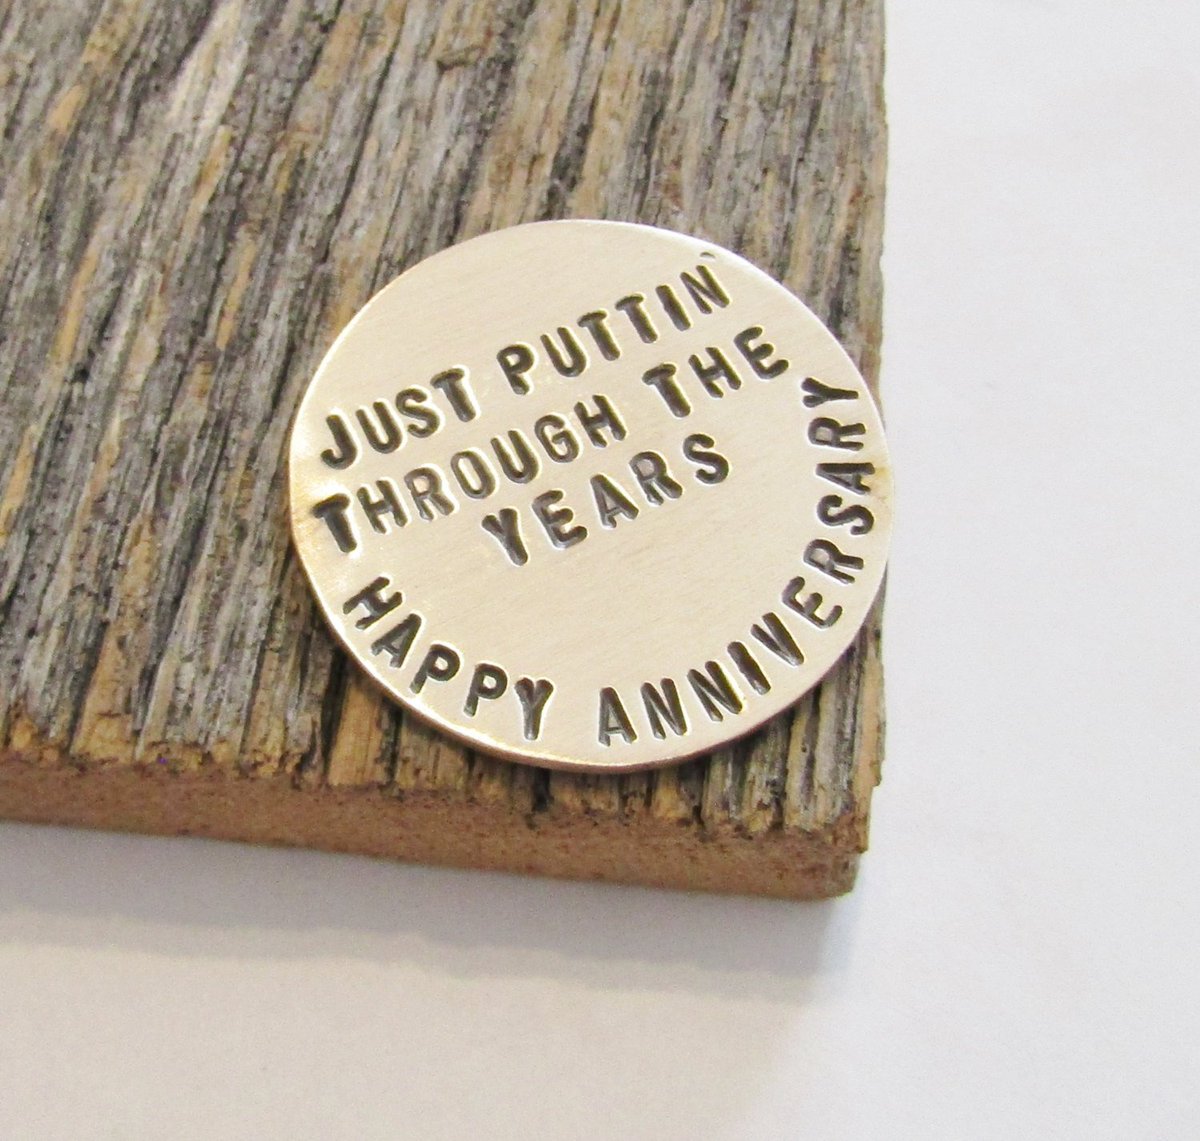 Just Puttin' Through The Years - Personalized Golf Ball Marker tuppu.net/4eac180f #Shopify #CandTCustomLures #AnniversaryForHer